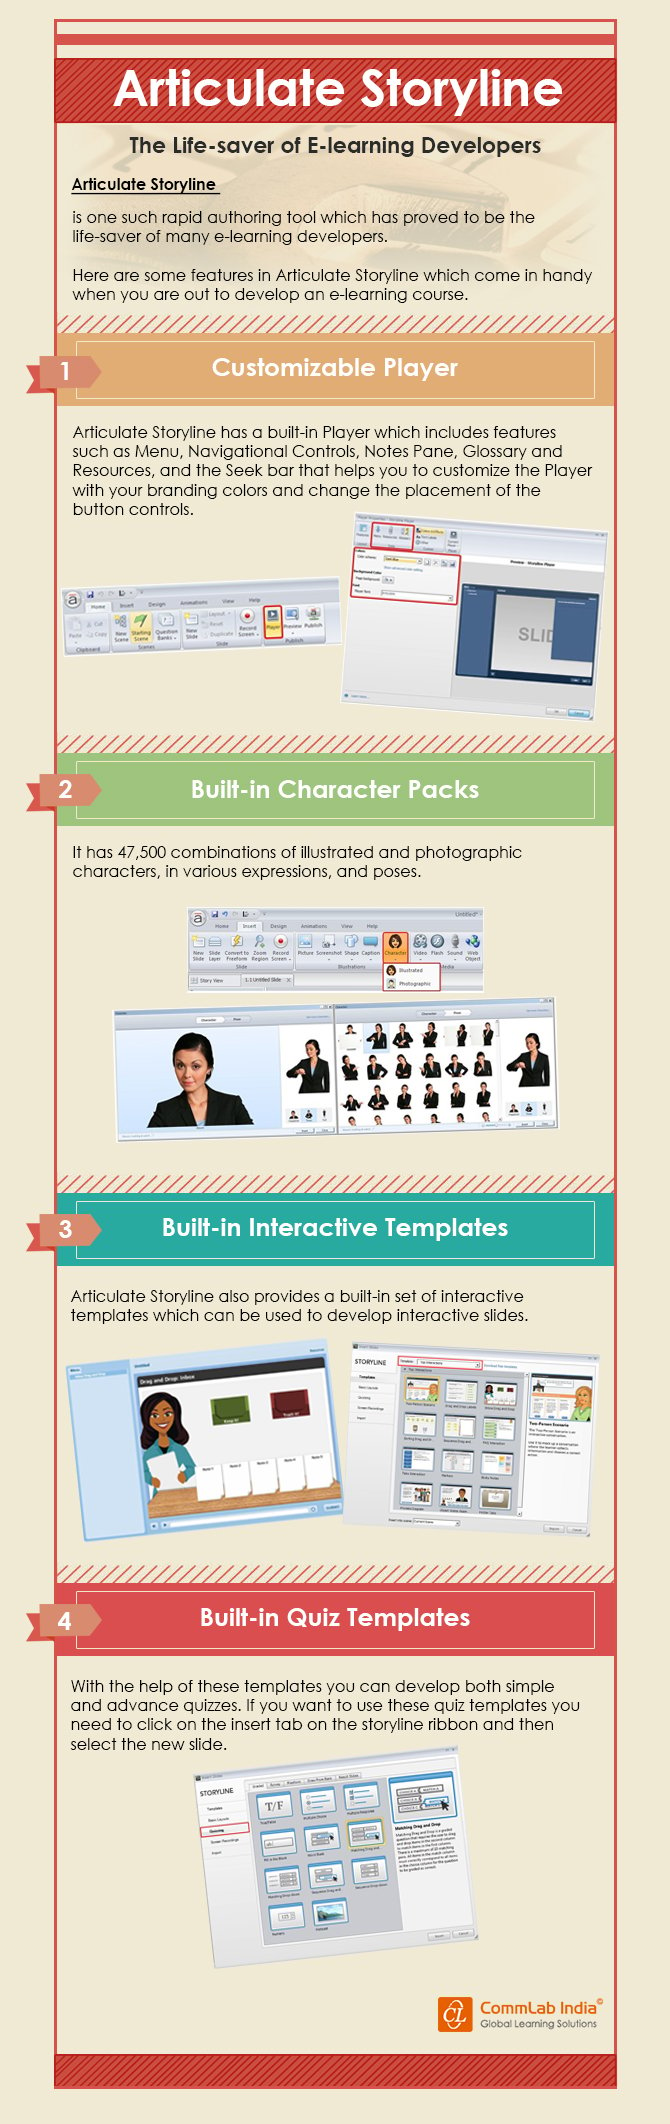 Articulate Storyline - The First Choice of E-learning Developers [Infographic]